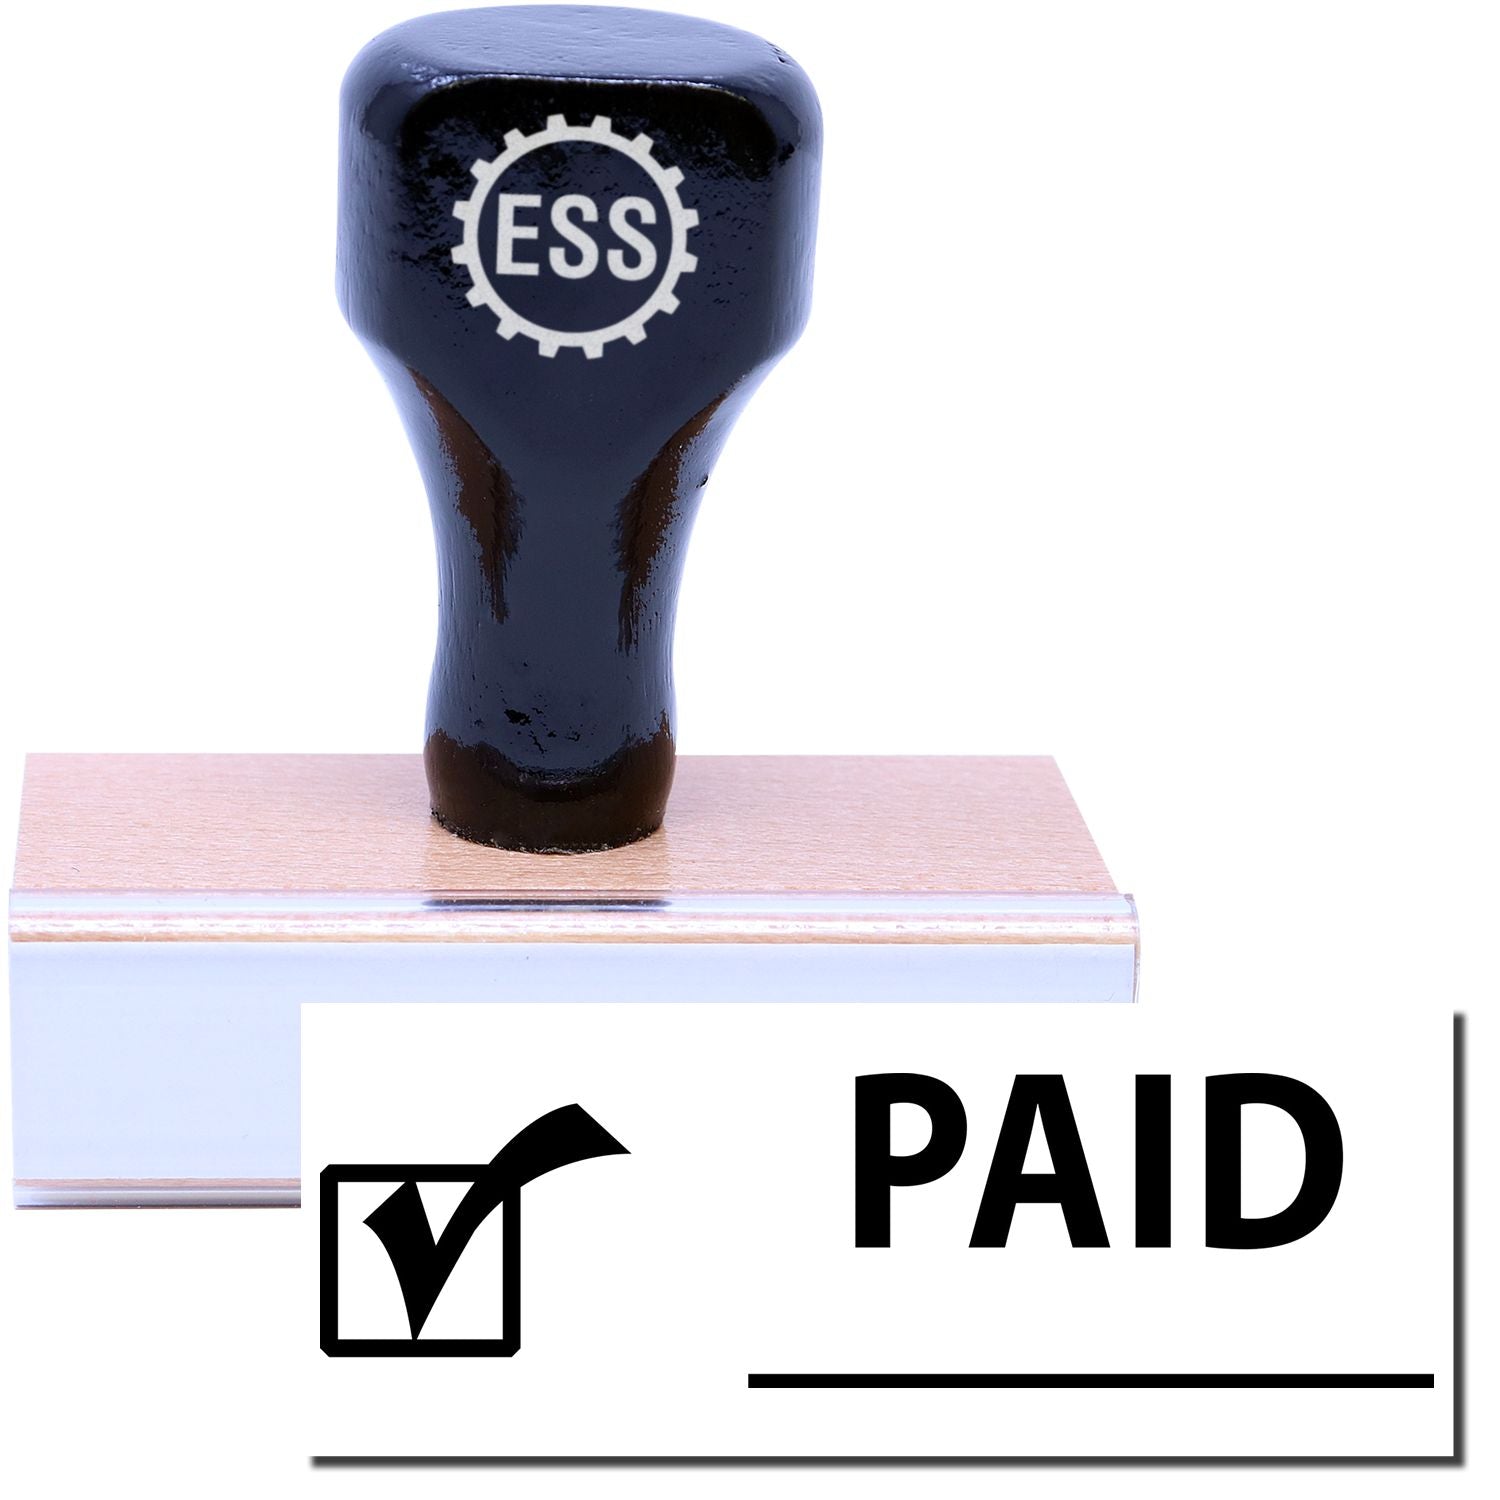 A stock office rubber stamp with a stamped image showing how the text "PAID" in a large font with a line underneath the text and a checkmark icon on the left side is displayed after stamping.